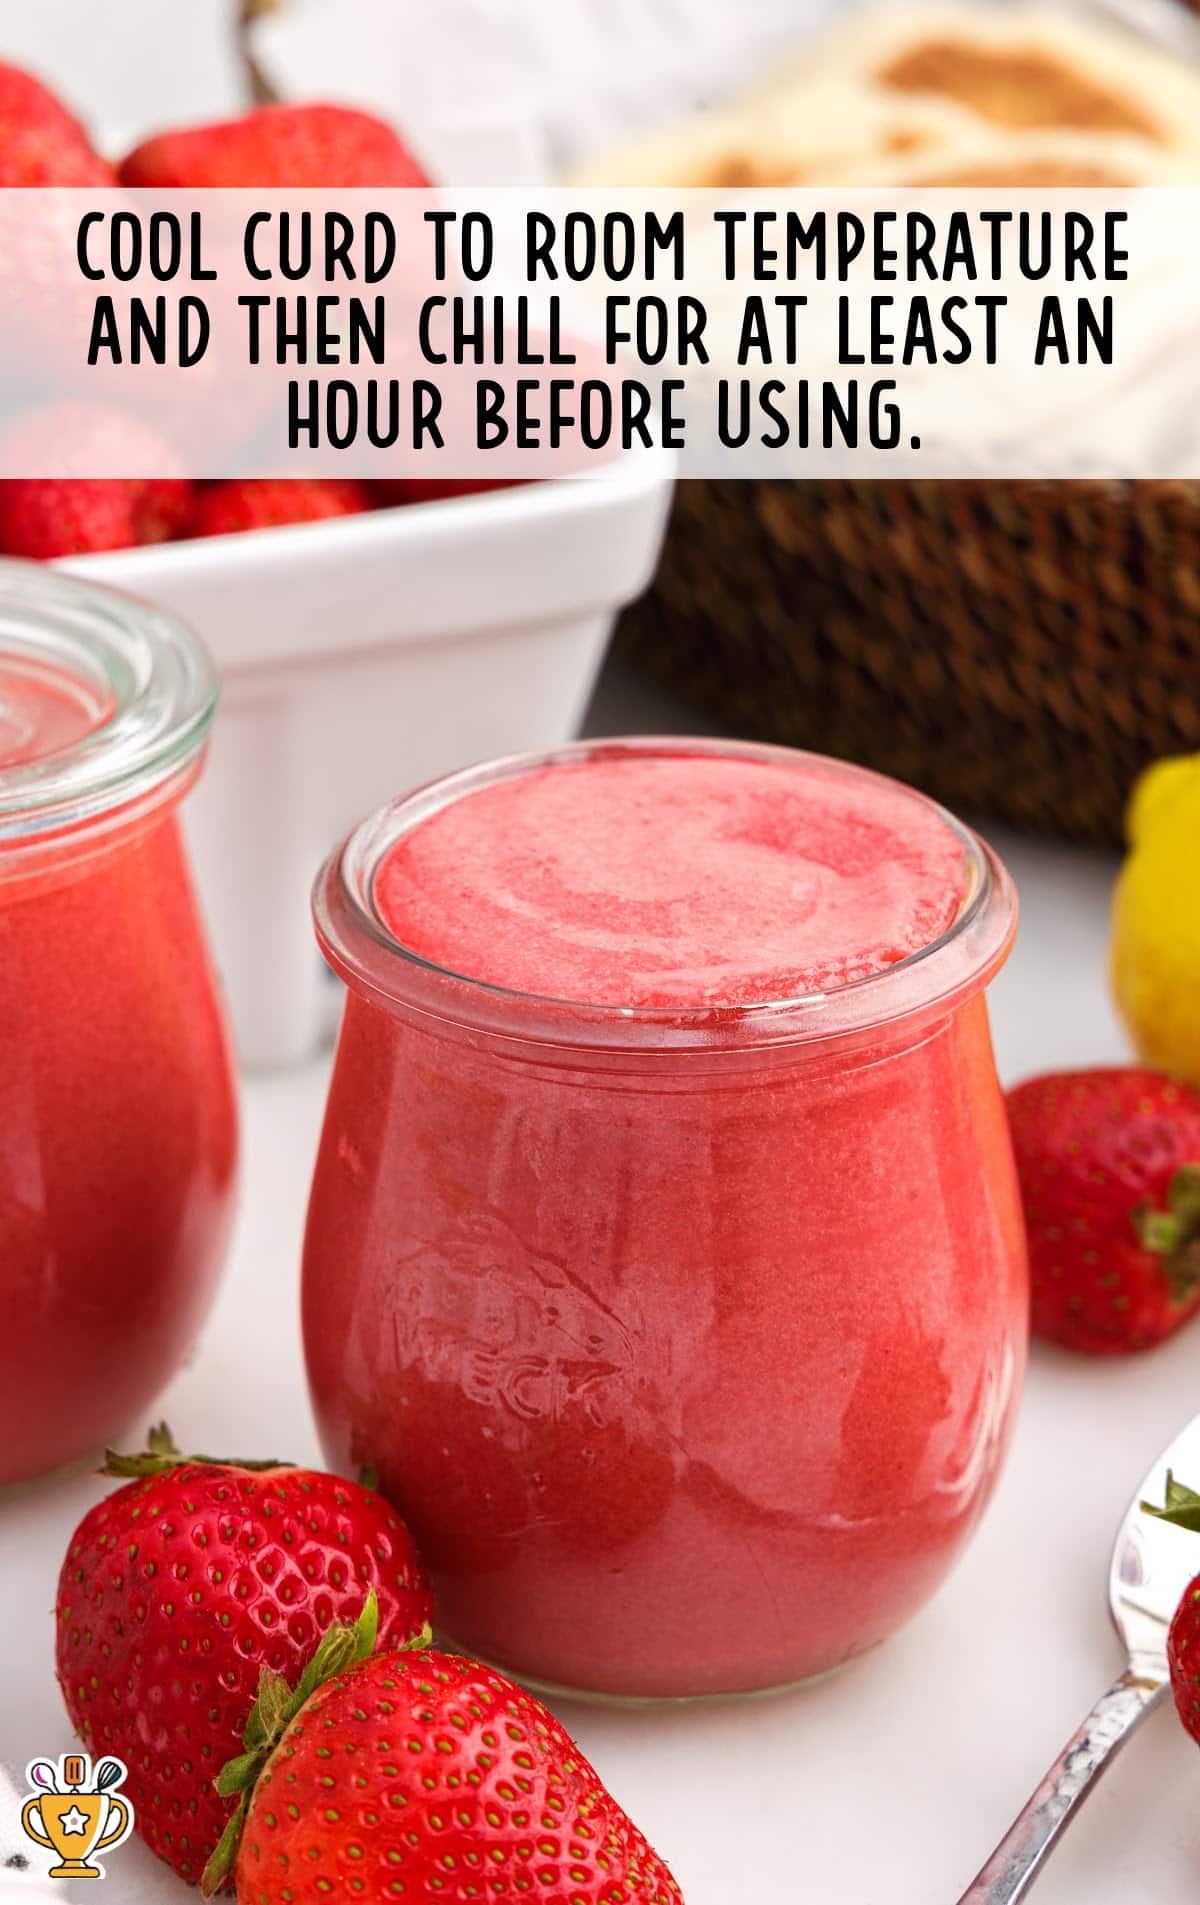 chill the Strawberry Curd for an hour